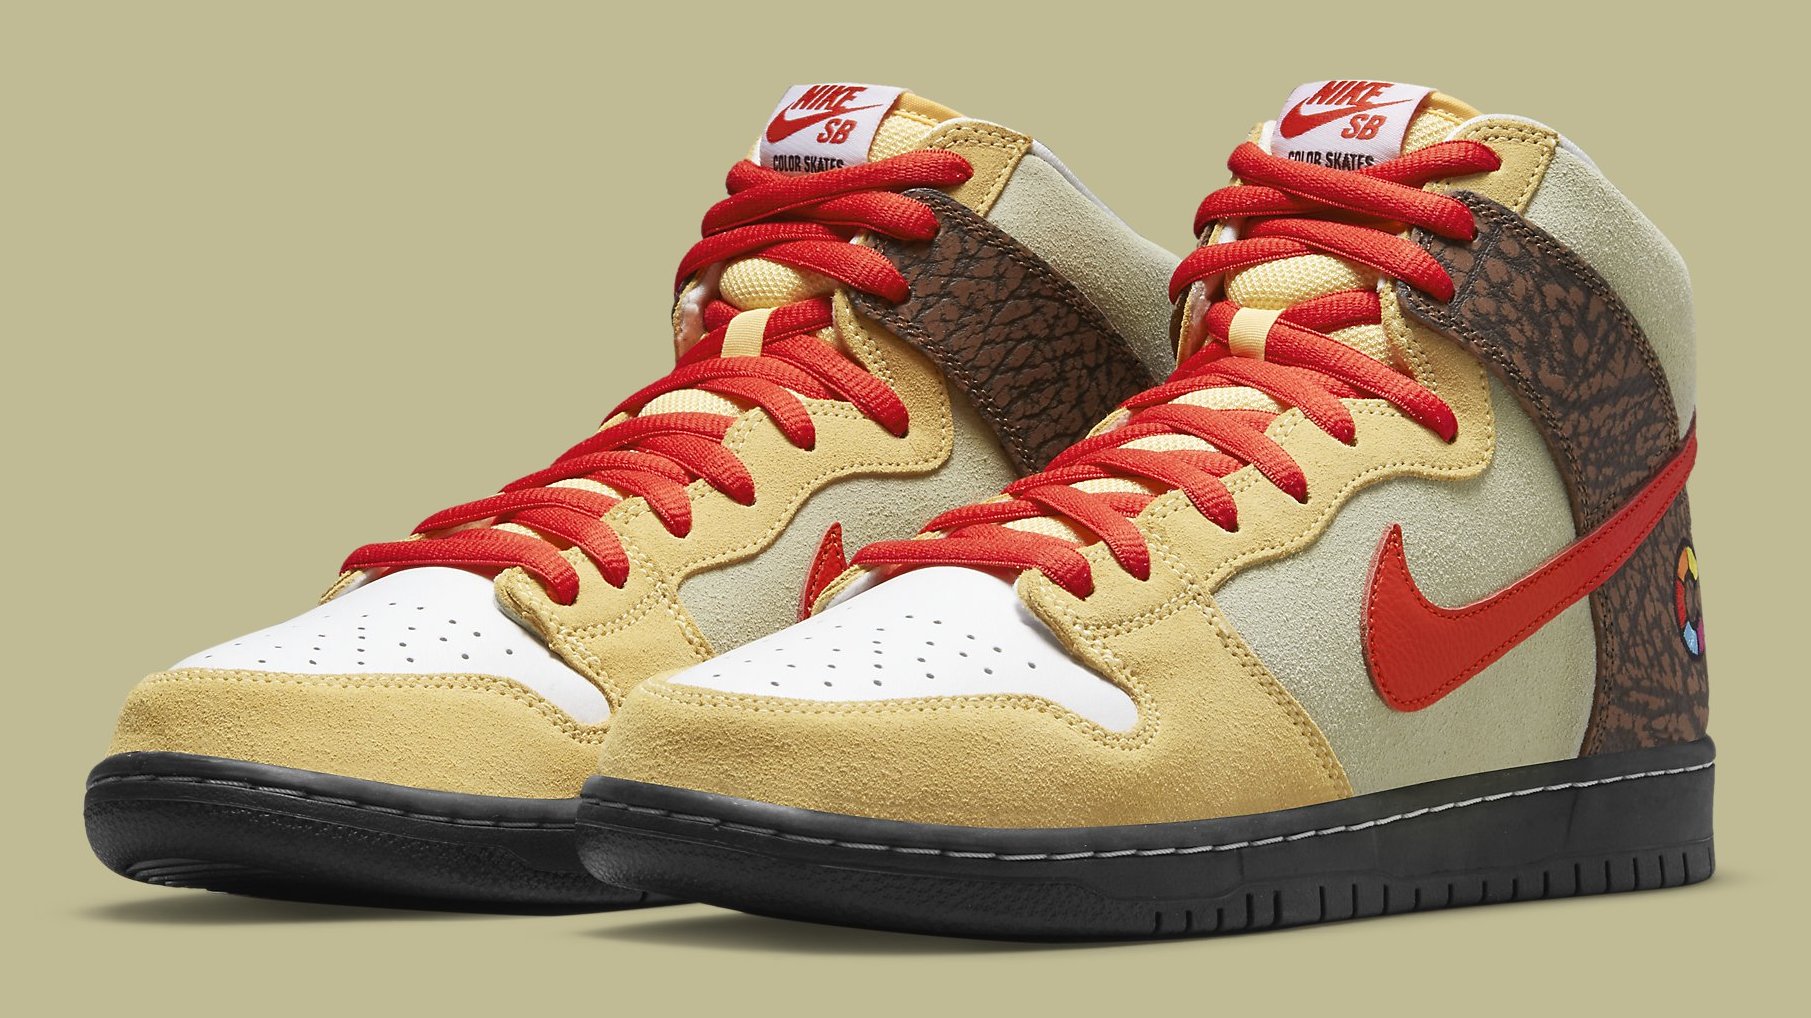 This Nike SB Dunk Collab Is Inspired by Kebab | Complex